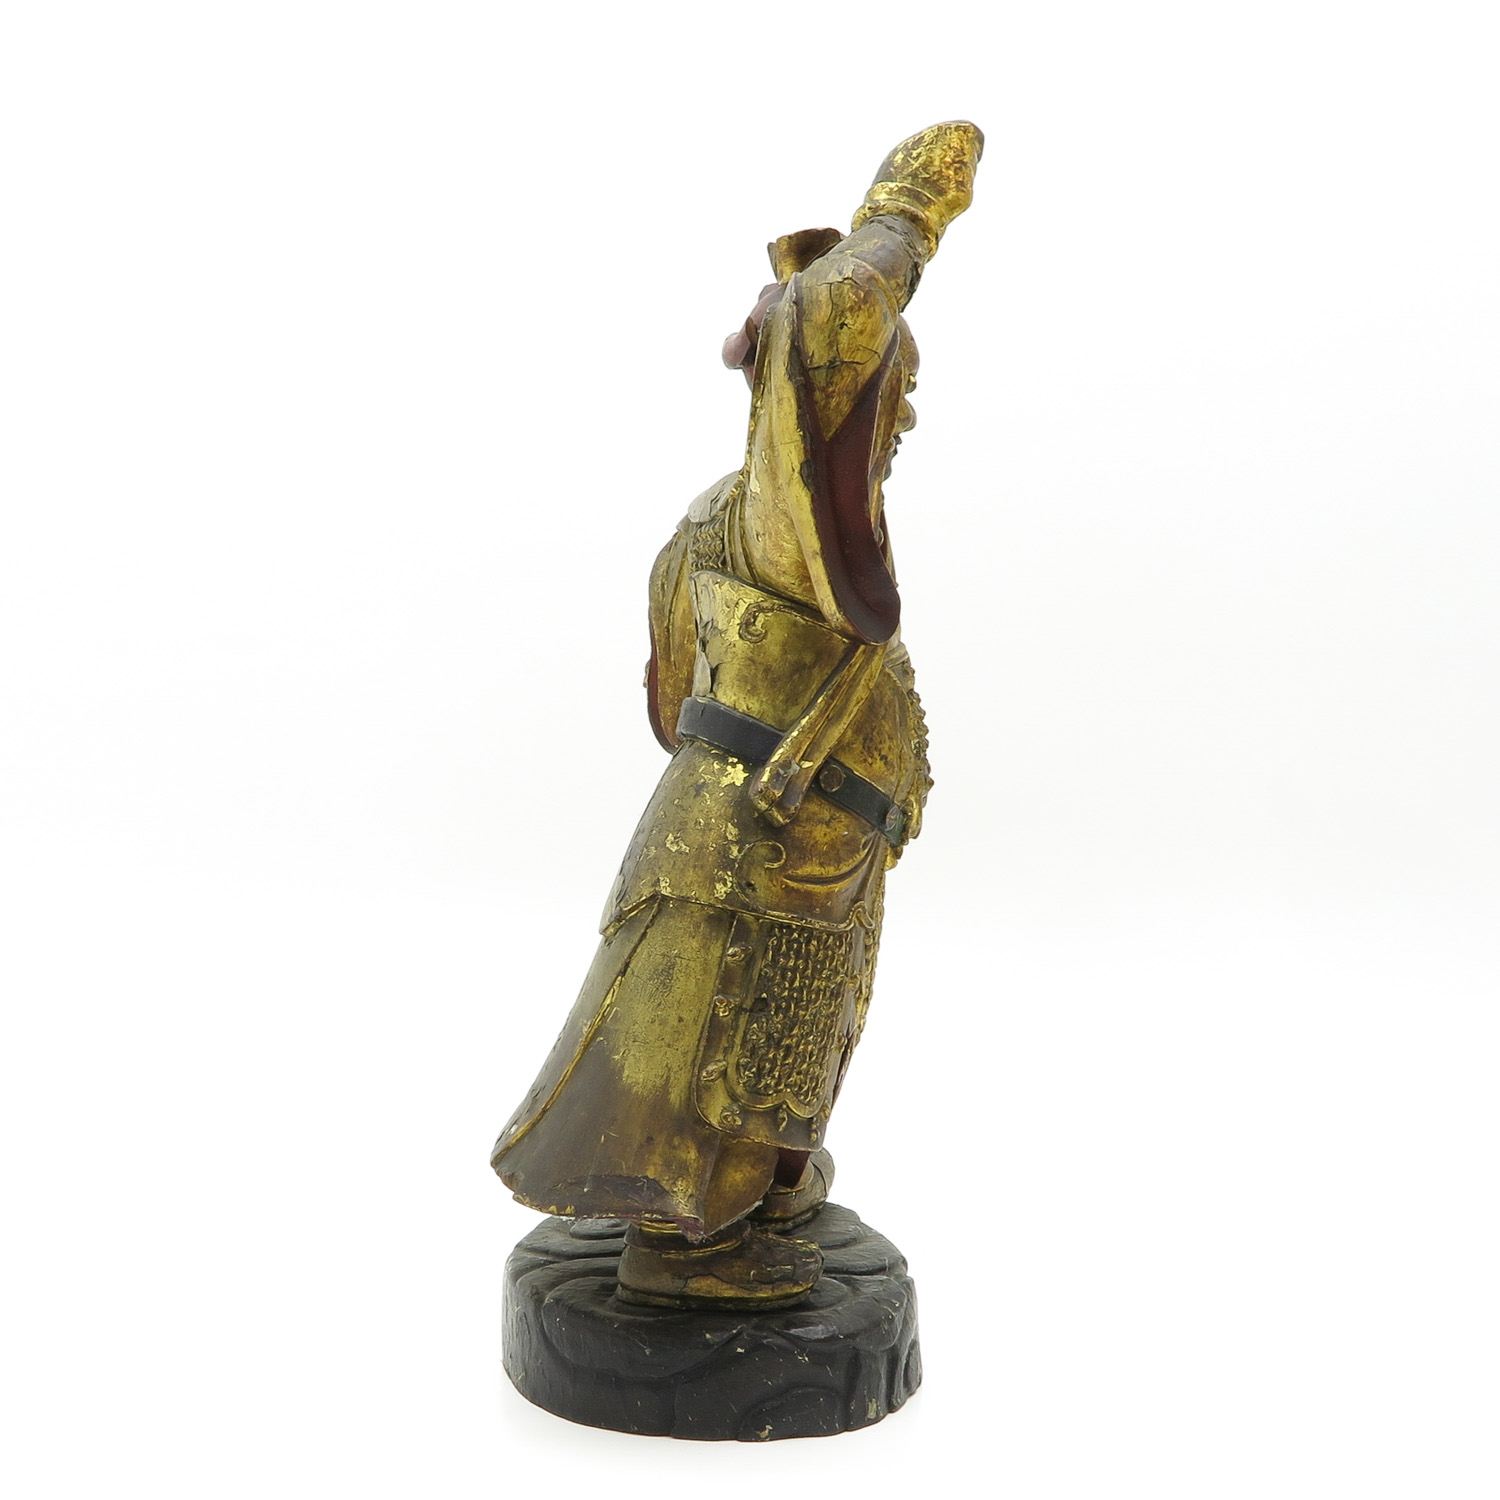 18th / 19th Century Carved Chinese Wood Sculpture - Image 4 of 6